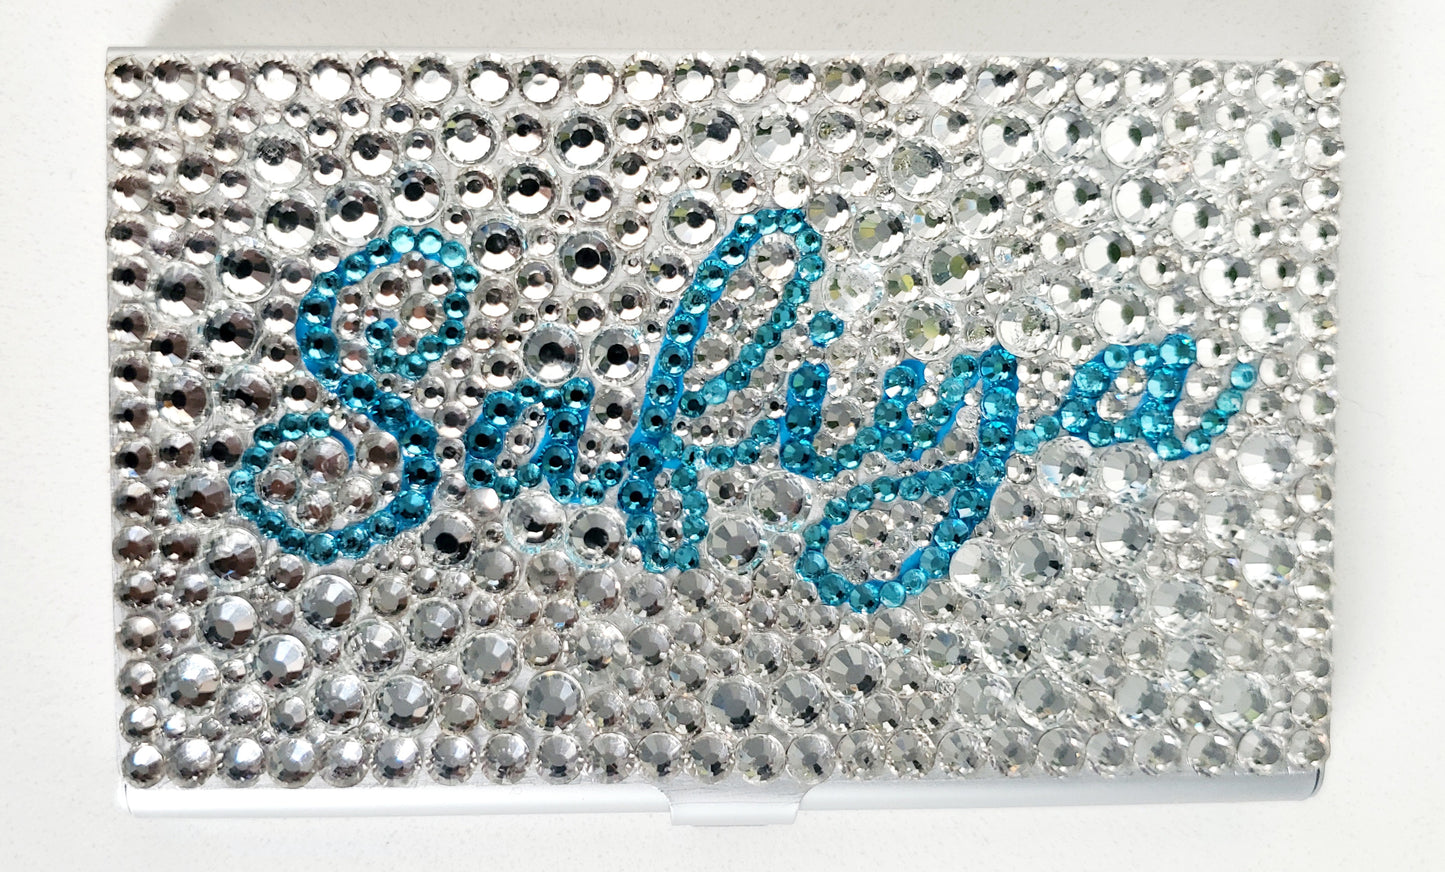 Blinged personalized business card holder